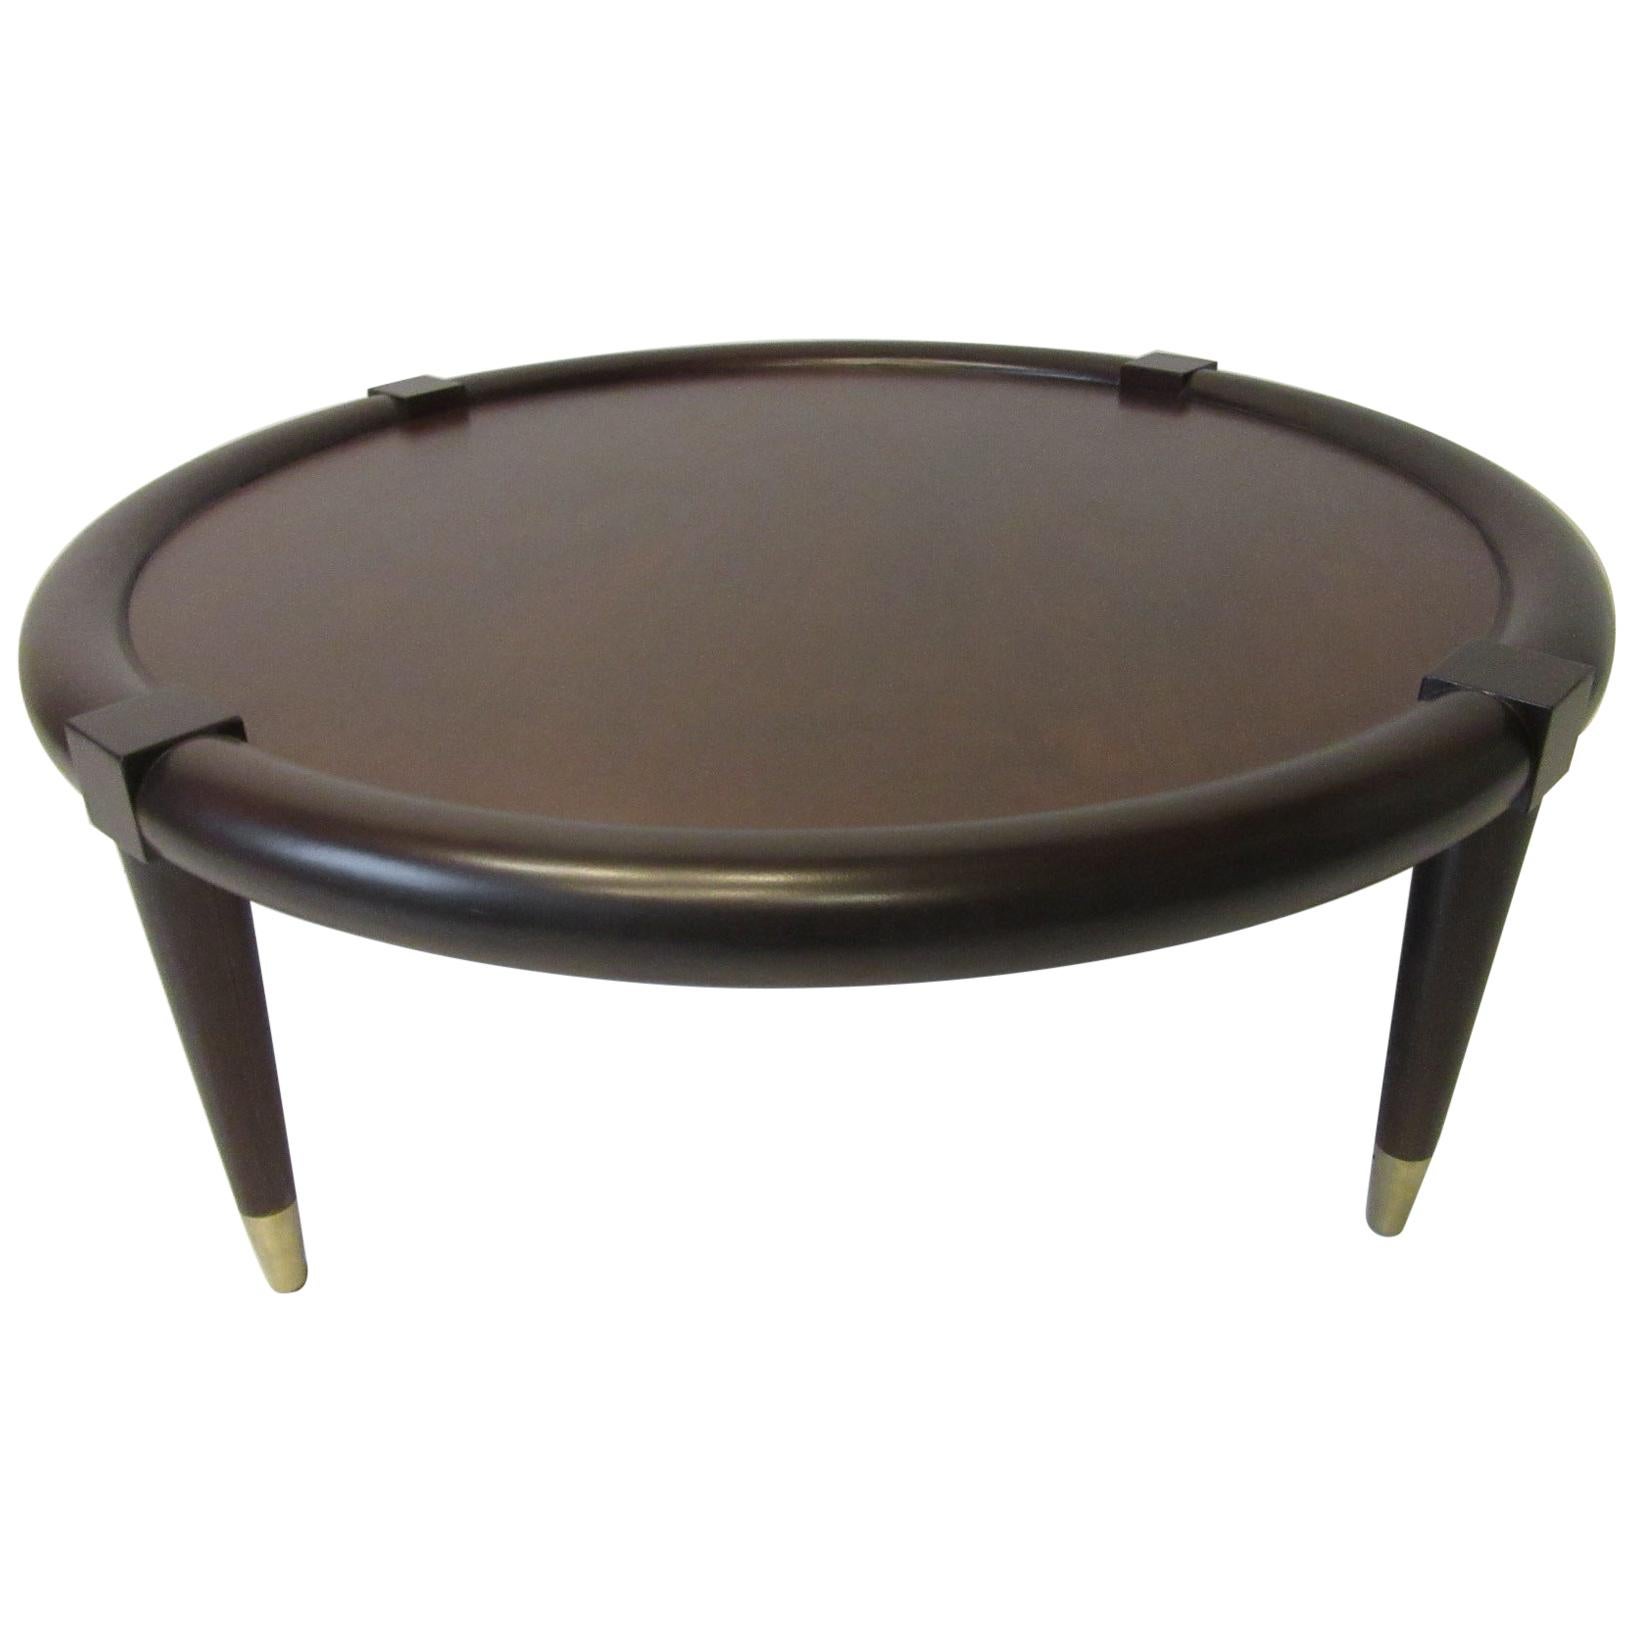 Midcentury Bull Nose Round Coffee Table